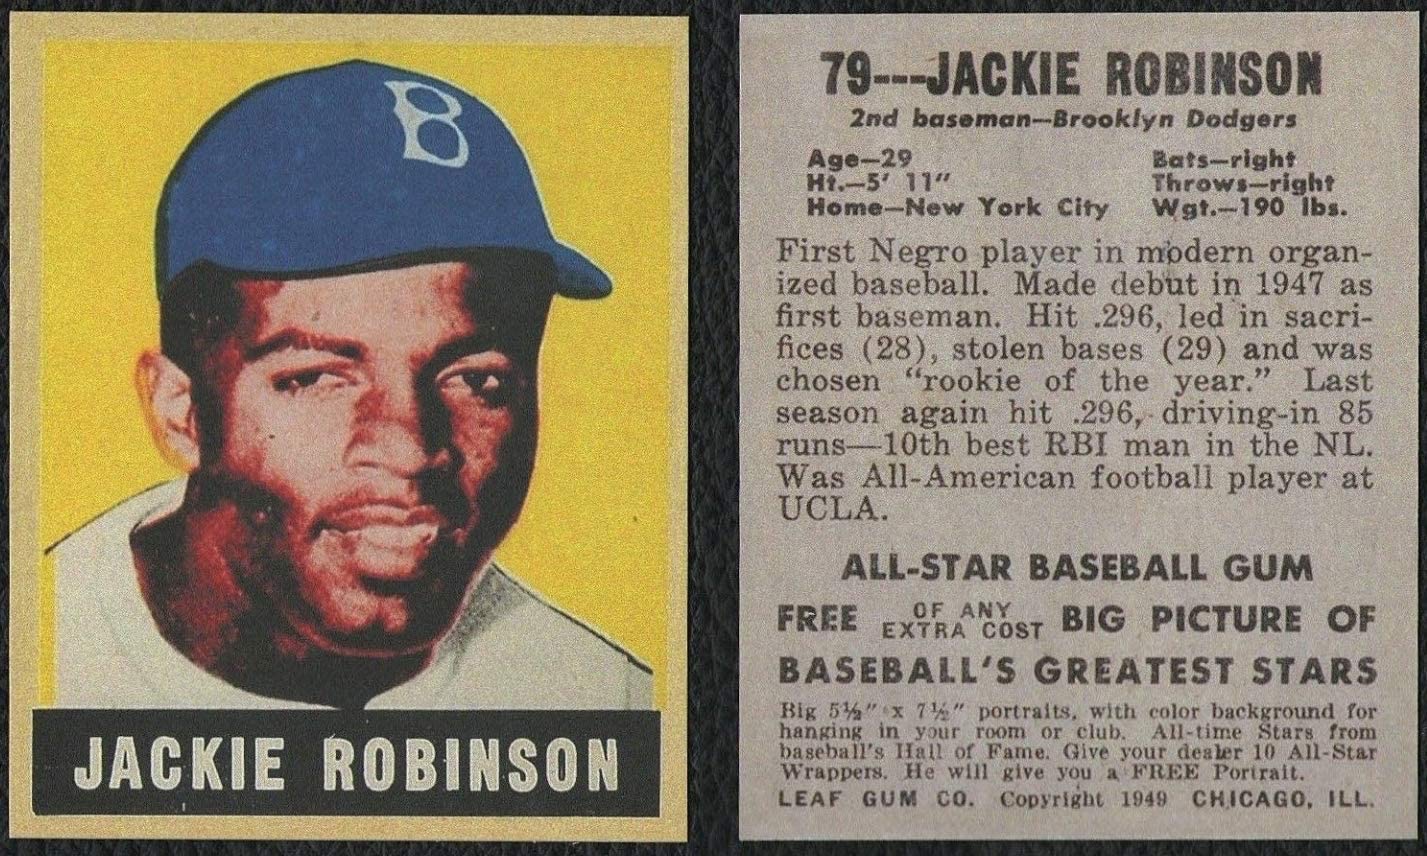 A Young Jackie Robinson Found on Two 1940s Cigarette Cards